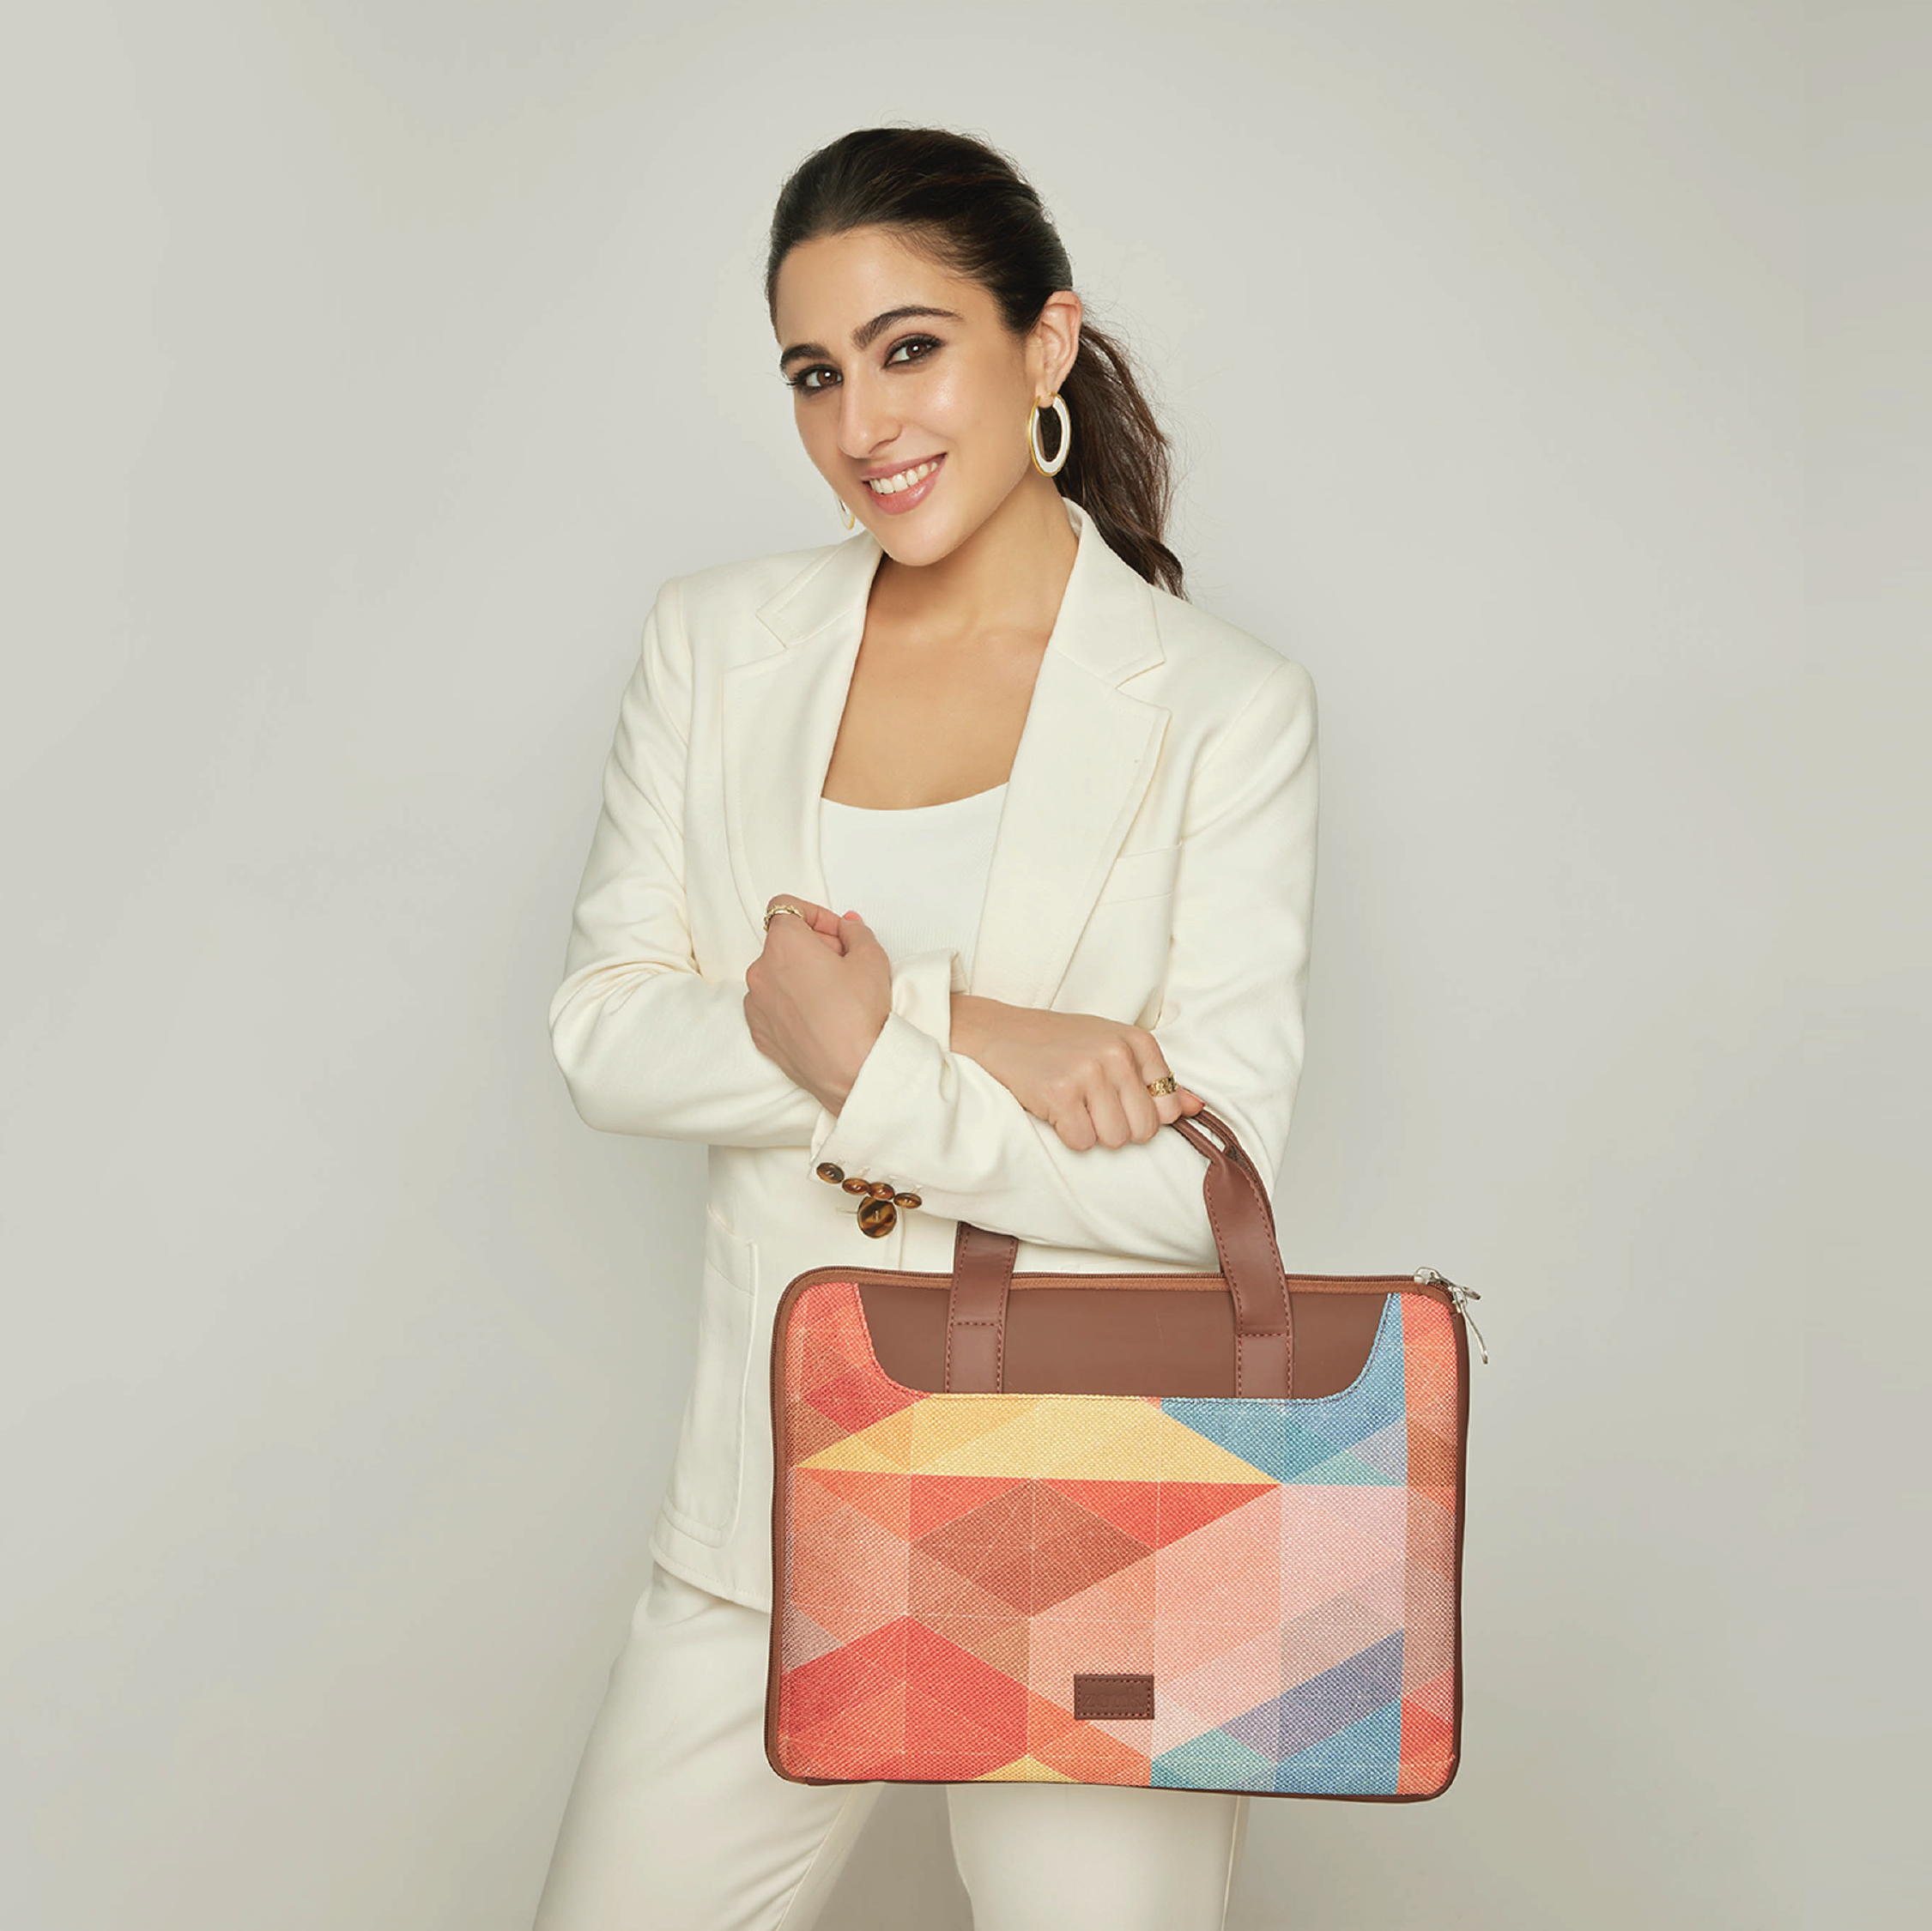 Buy SAINIK'S - ACCESS TO QUALITY Tote Bags for Women with Zip, College Bag  for Girls, Tote Bag for Traveling & Daily Use